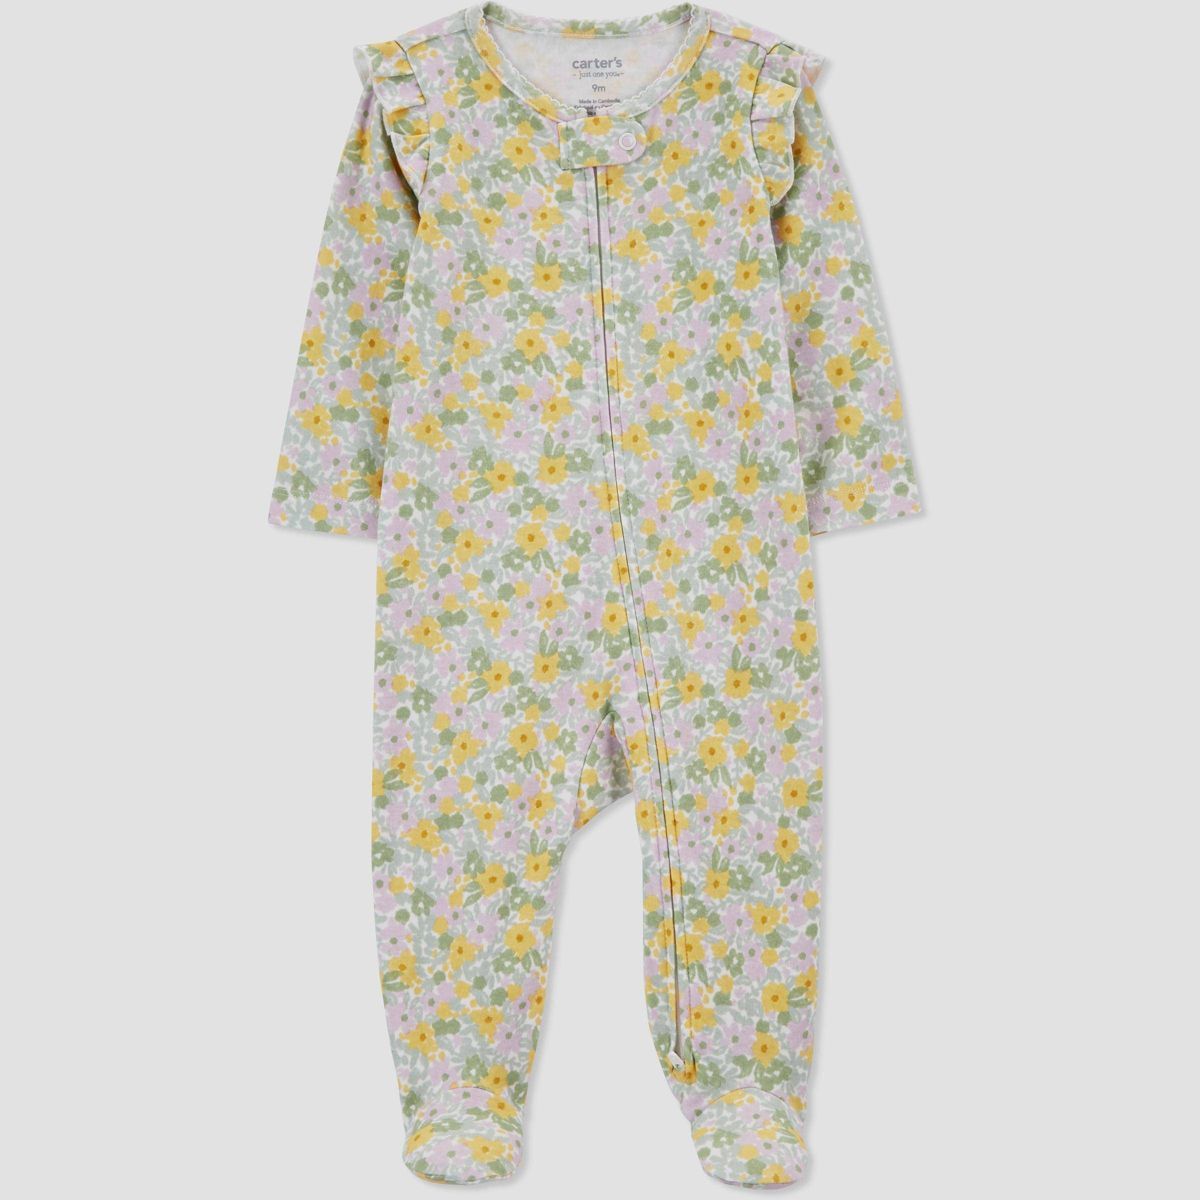 Carter's Just One You®️ Baby Girls' Floral Footed Pajama - Green/Yellow | Target